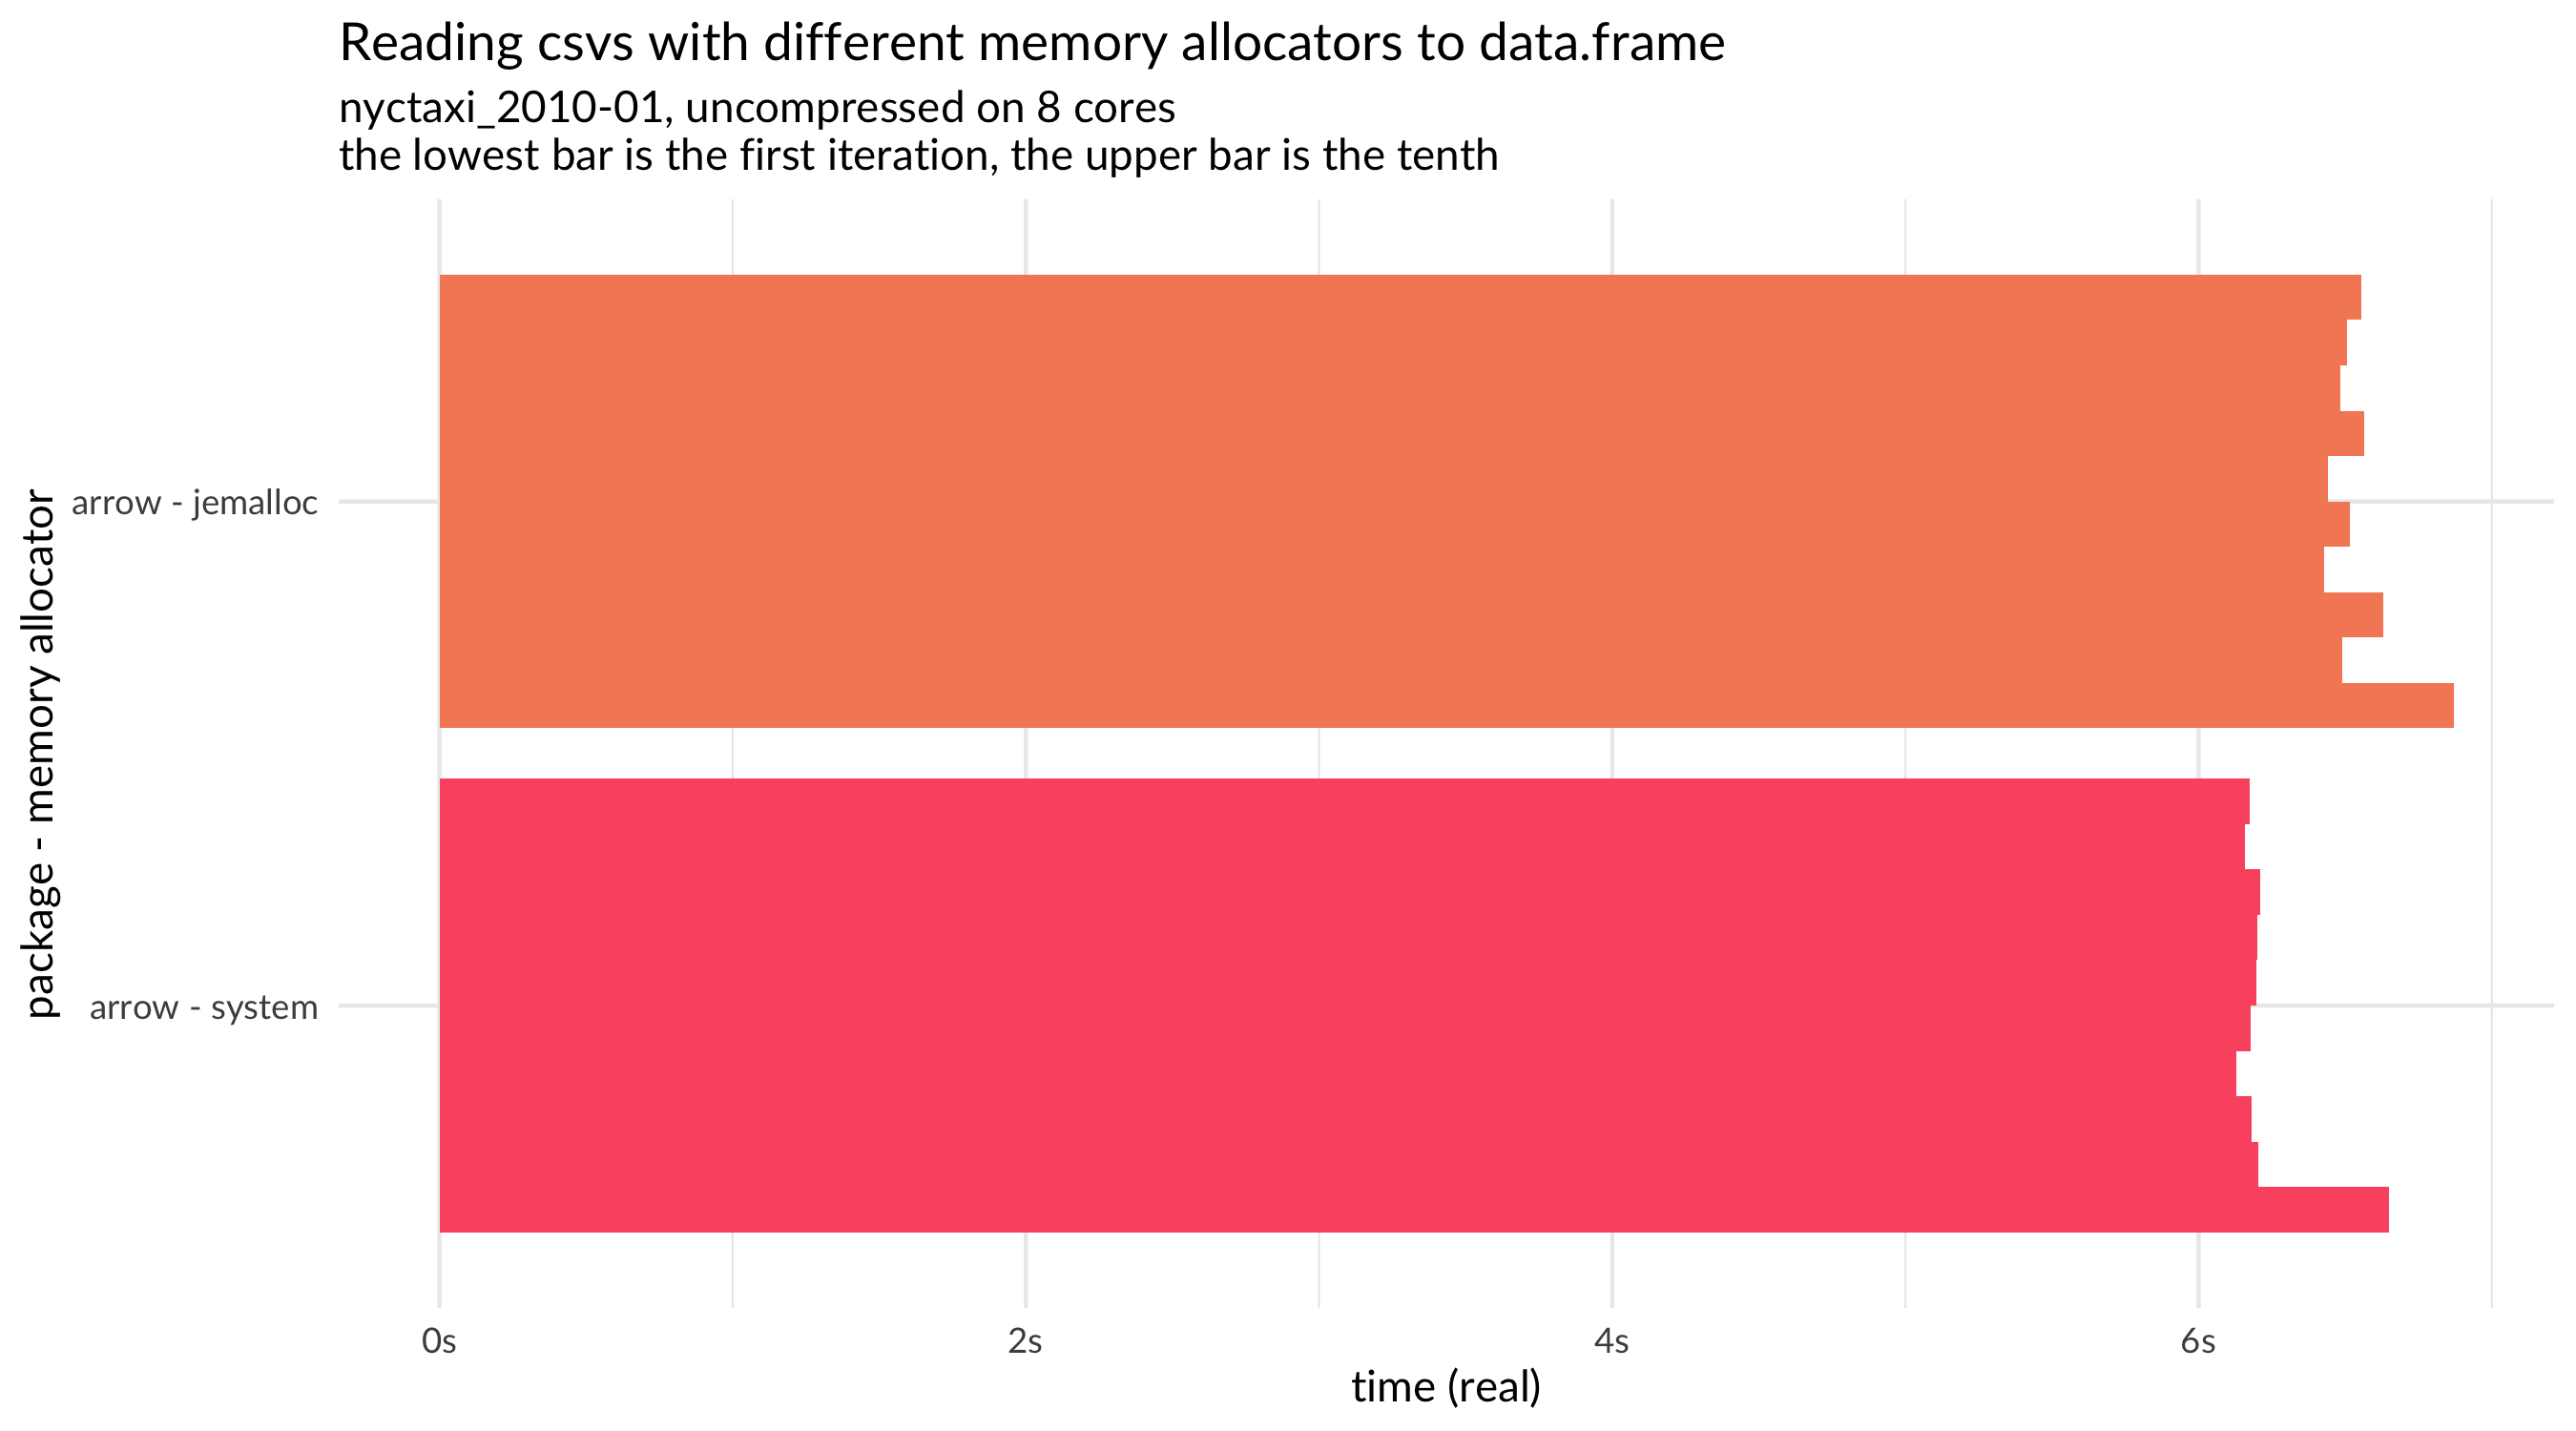 A bar chart showing differences between jemalloc and the system memory allocator when reading into a data.frame. Each has 10 iterations. Both allocators show similar speeds; the first iteration is longest, and subsequent iterations are longer. Dataset: uncompressed nyctaxi_2010-01 dataset with 8 cores